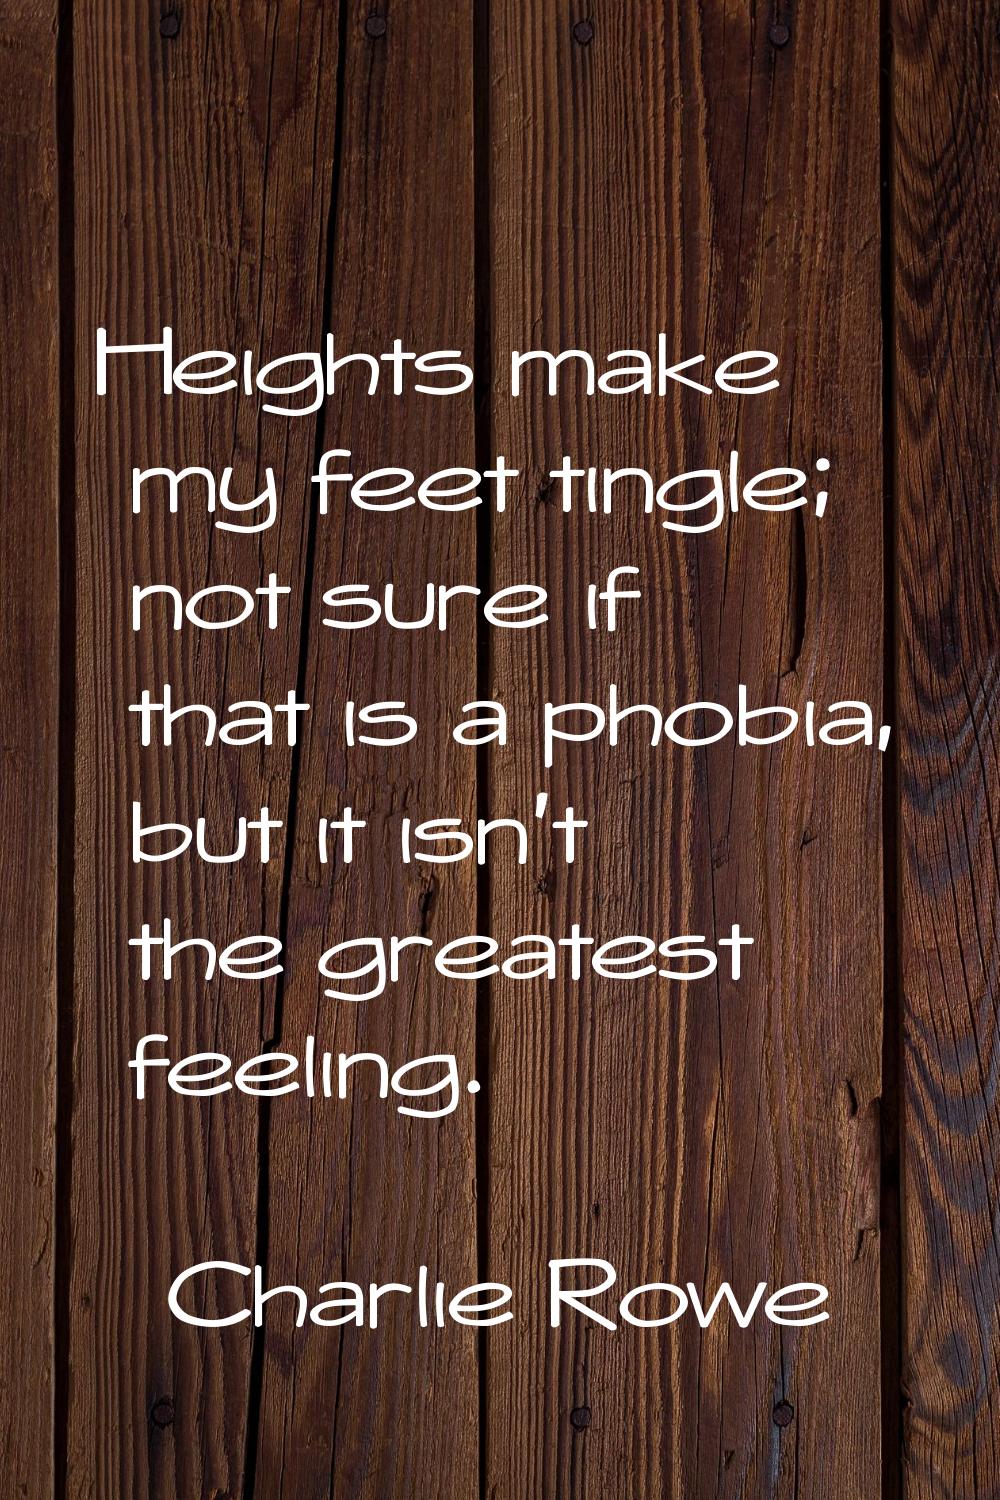 Heights make my feet tingle; not sure if that is a phobia, but it isn't the greatest feeling.